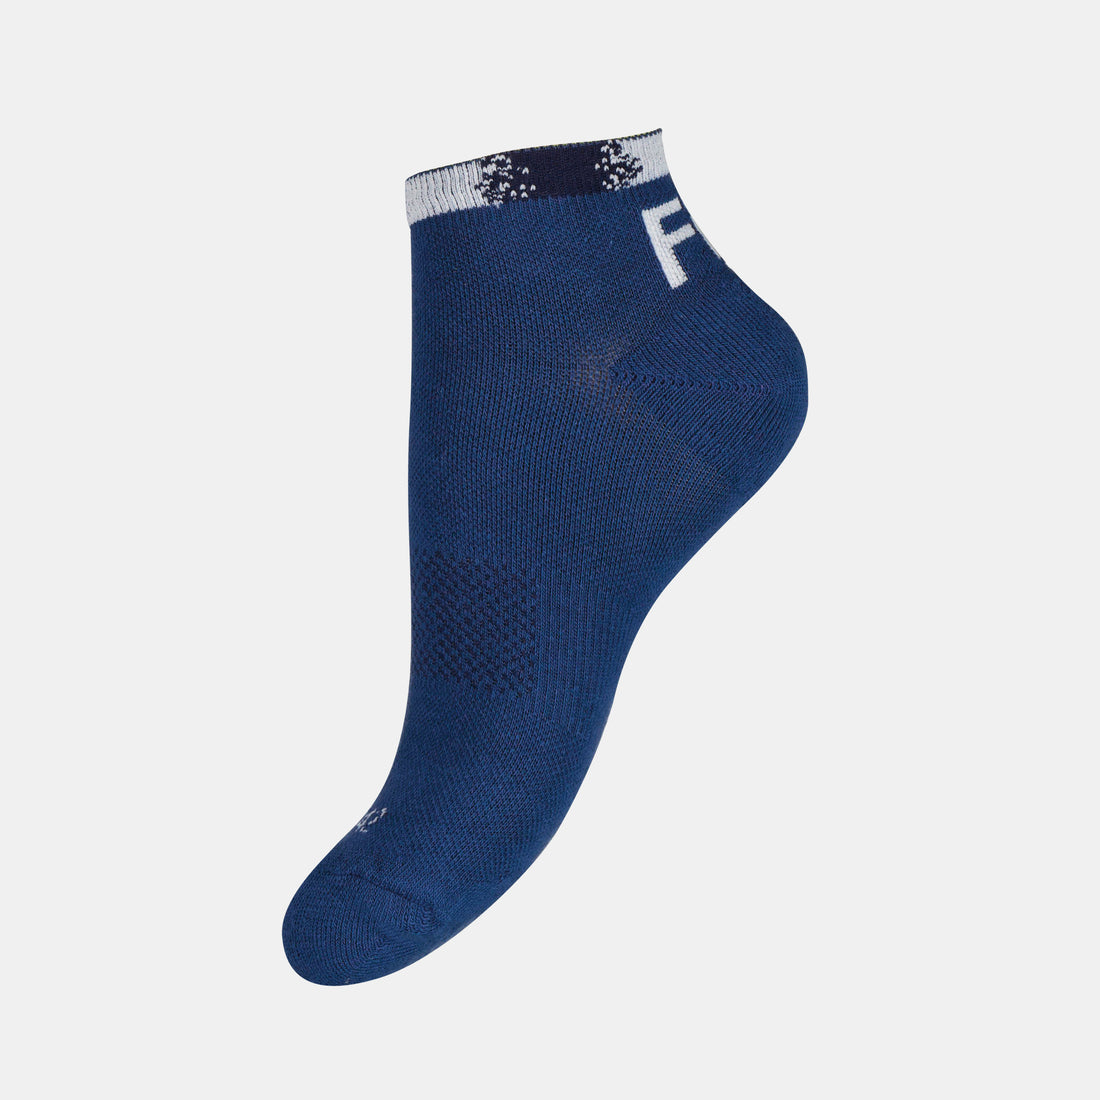 2410112-O TRAINING Chaussettes Basse N°1 insigni  | Calcetines Unisex